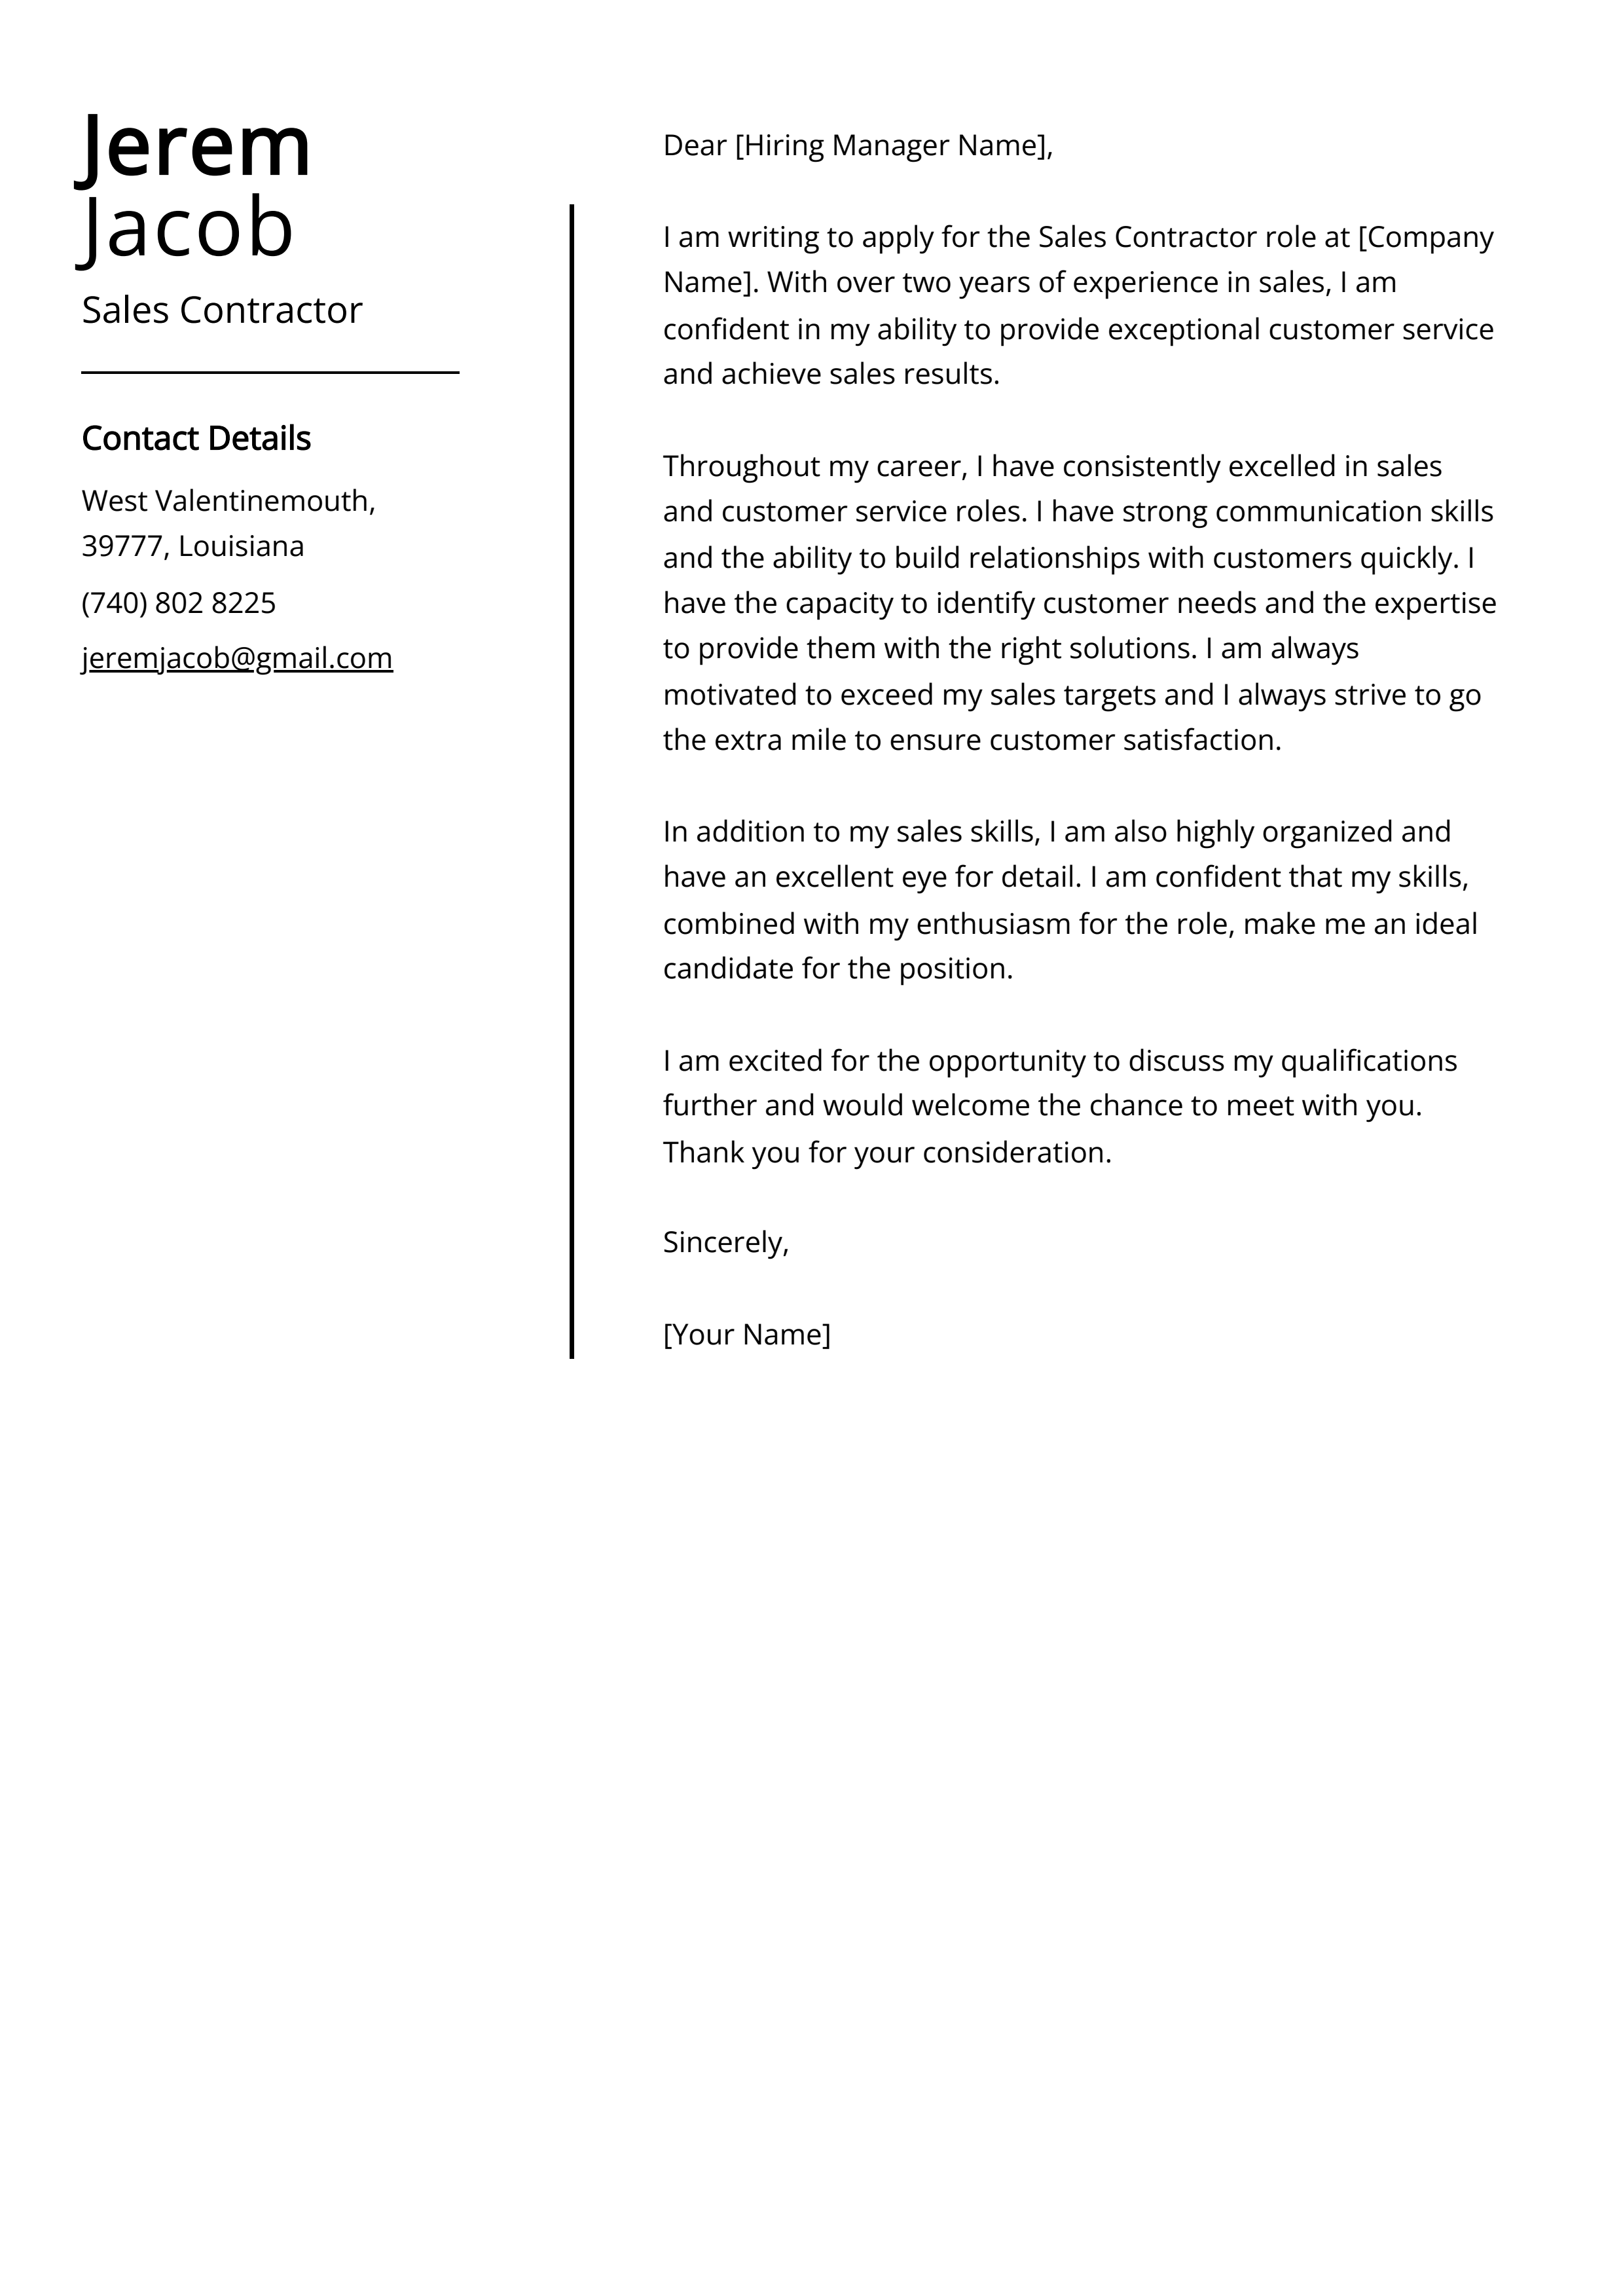 Sales Contractor Cover Letter Example